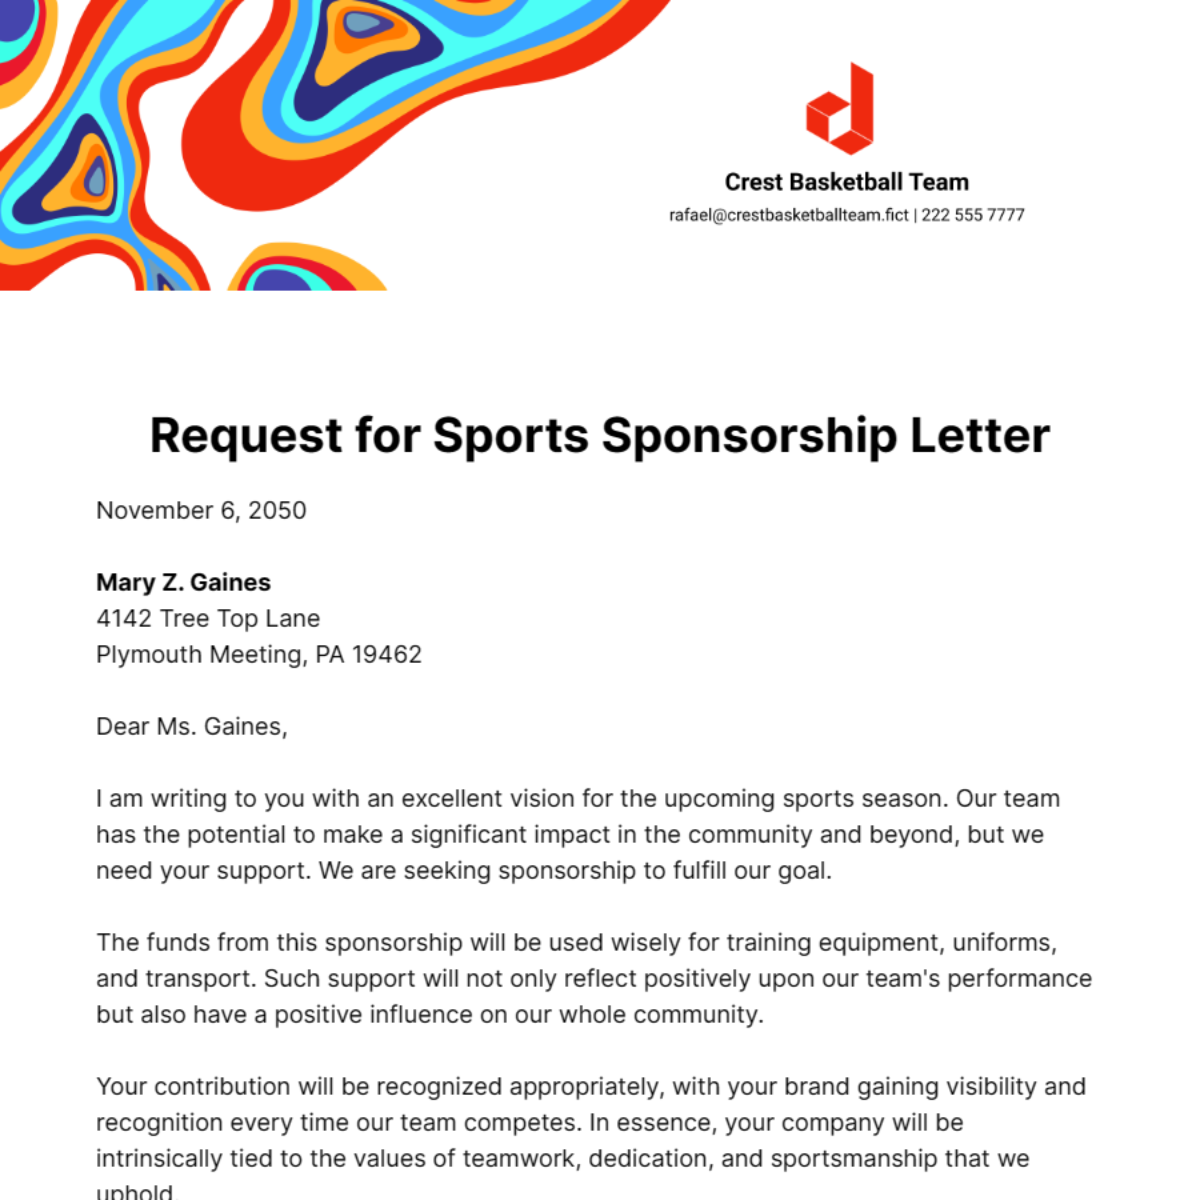 Request for Sports Sponsorship Letter Template